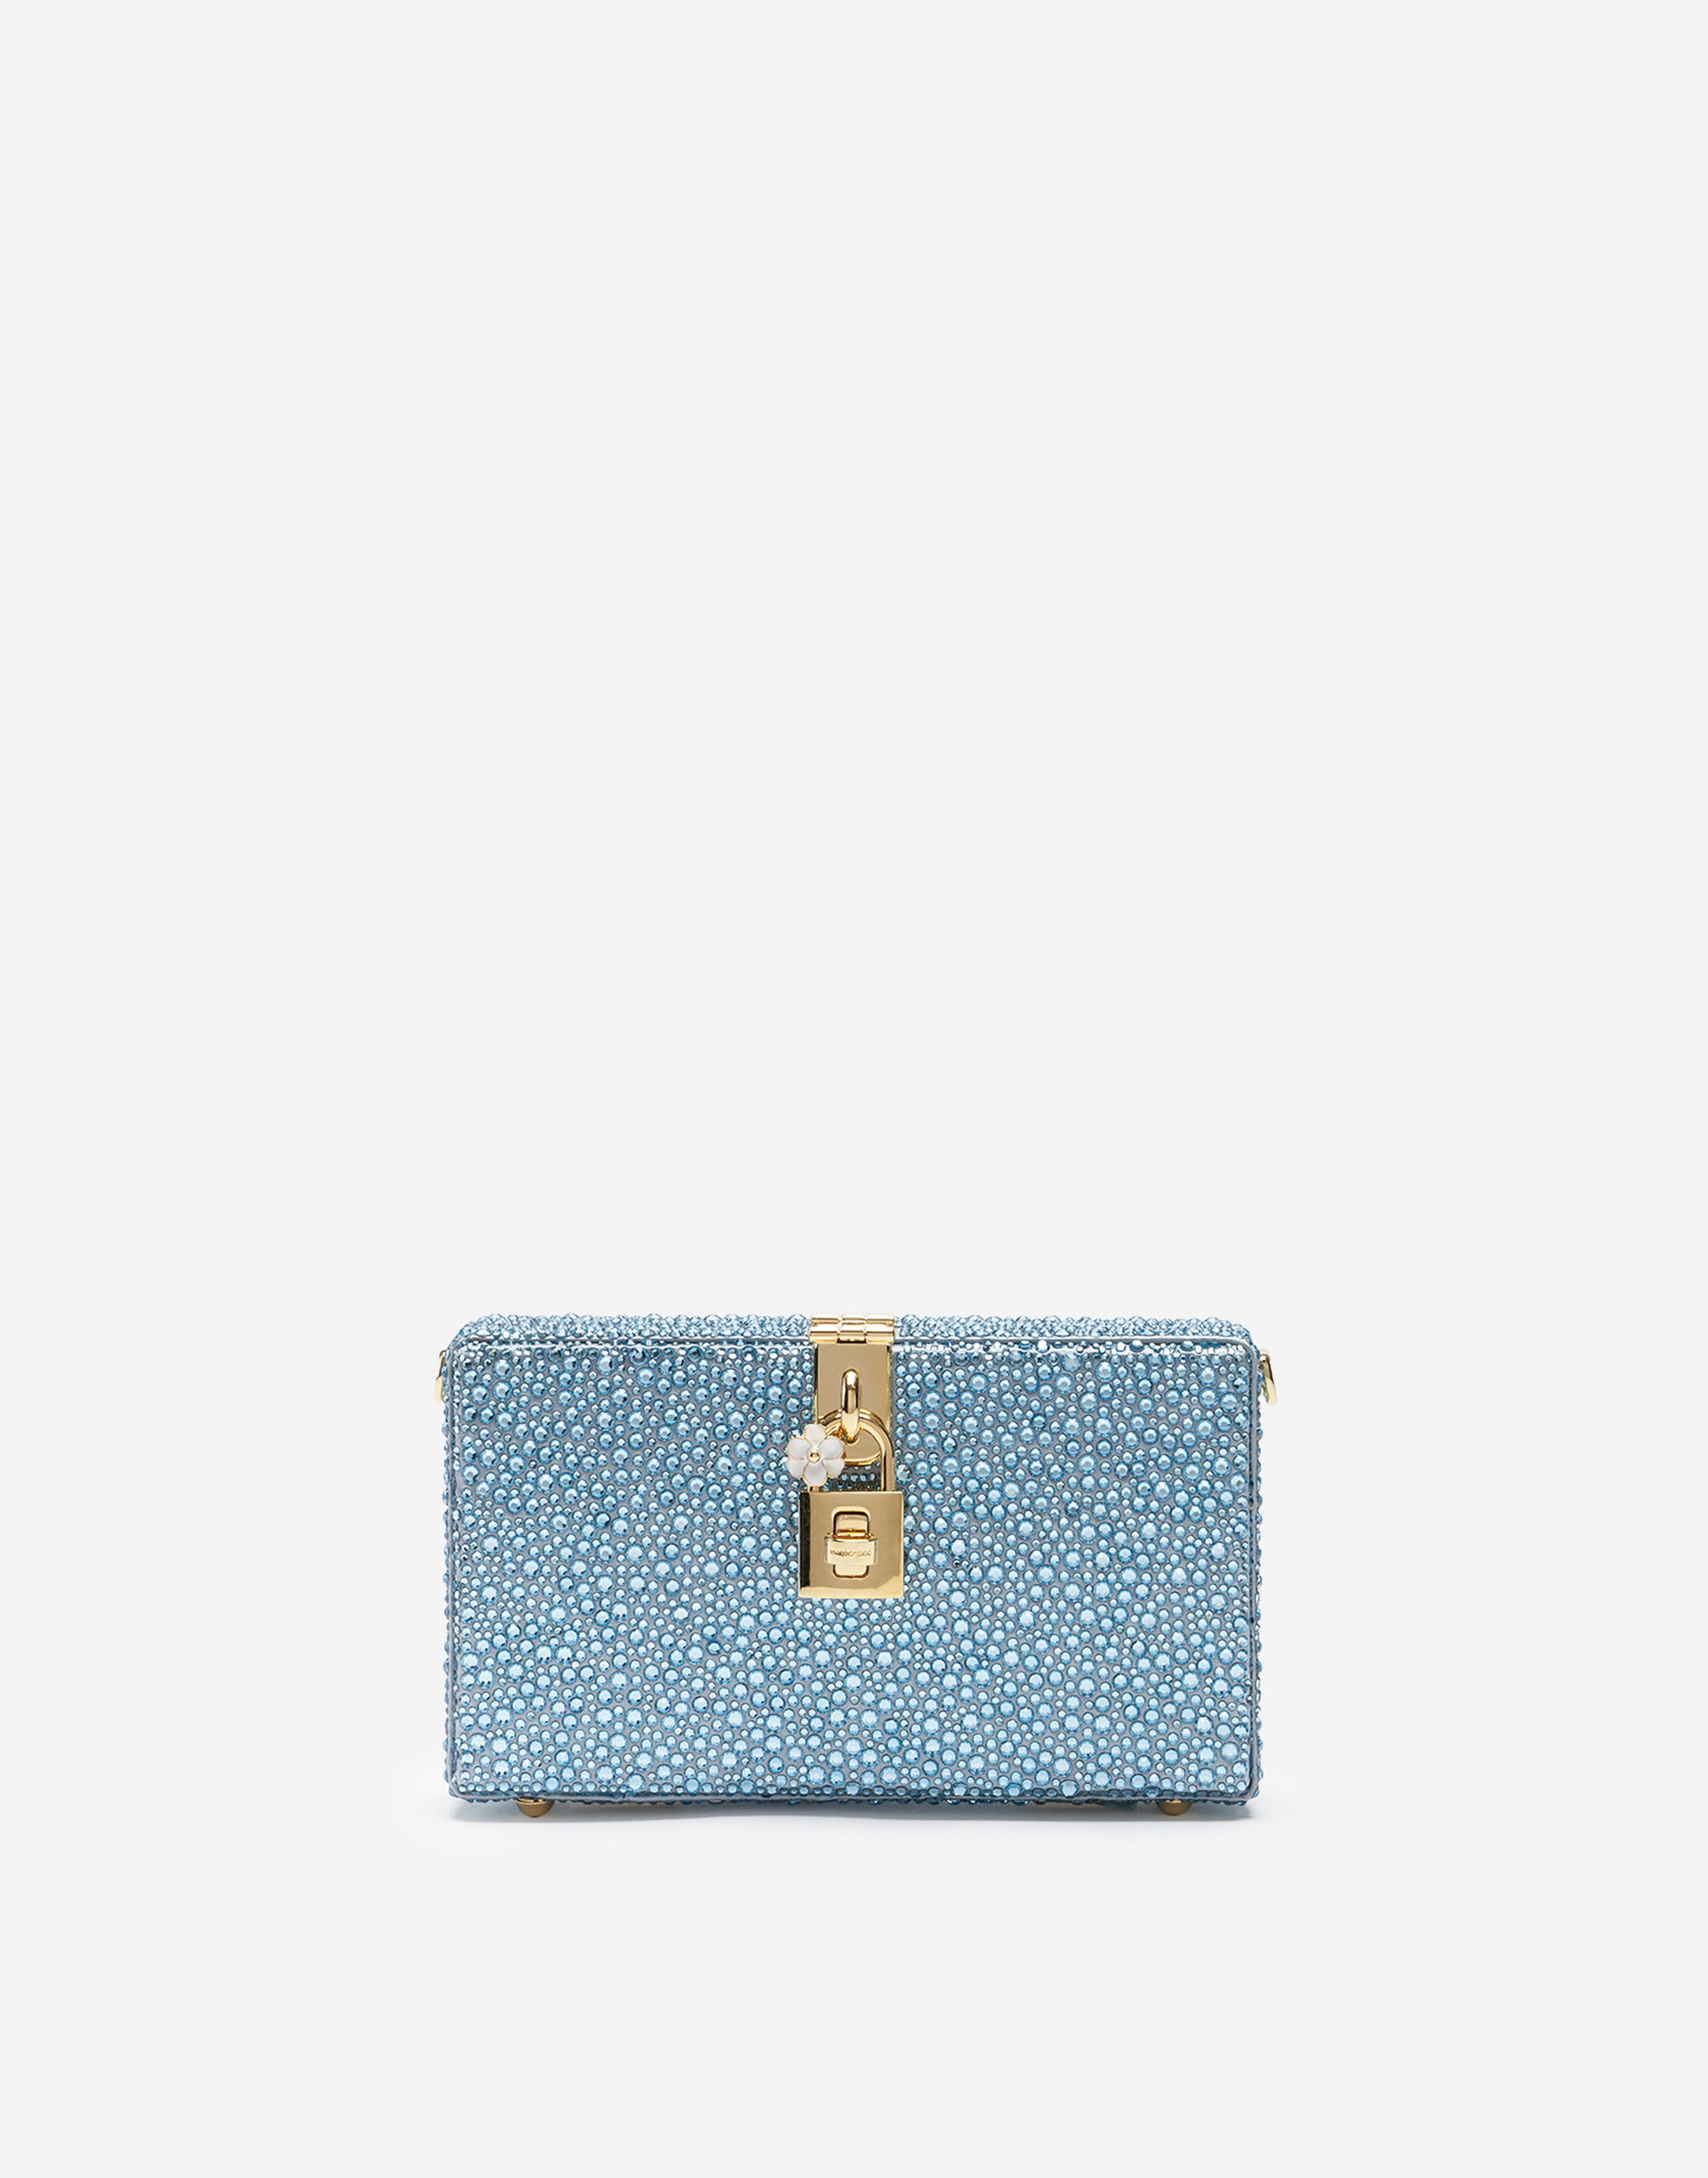 Dolce Box clutch with heat-applied rhinestones in Azure